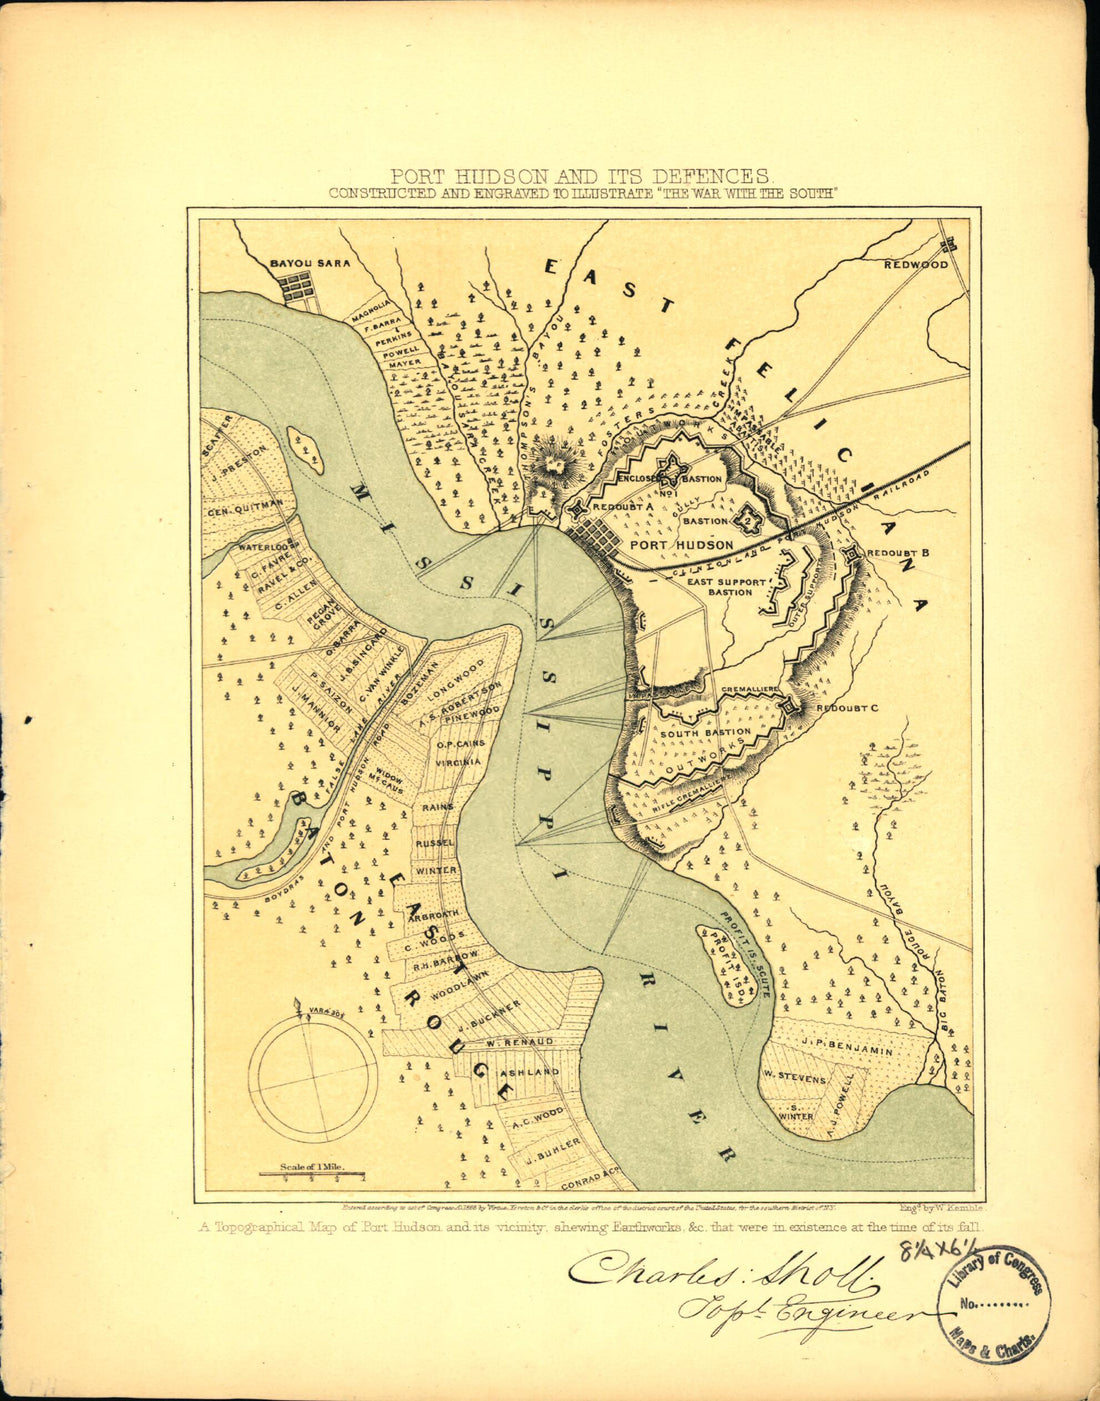 This old map of Port Hudson and Its Defences from 1863 was created by Charles Sholl in 1863